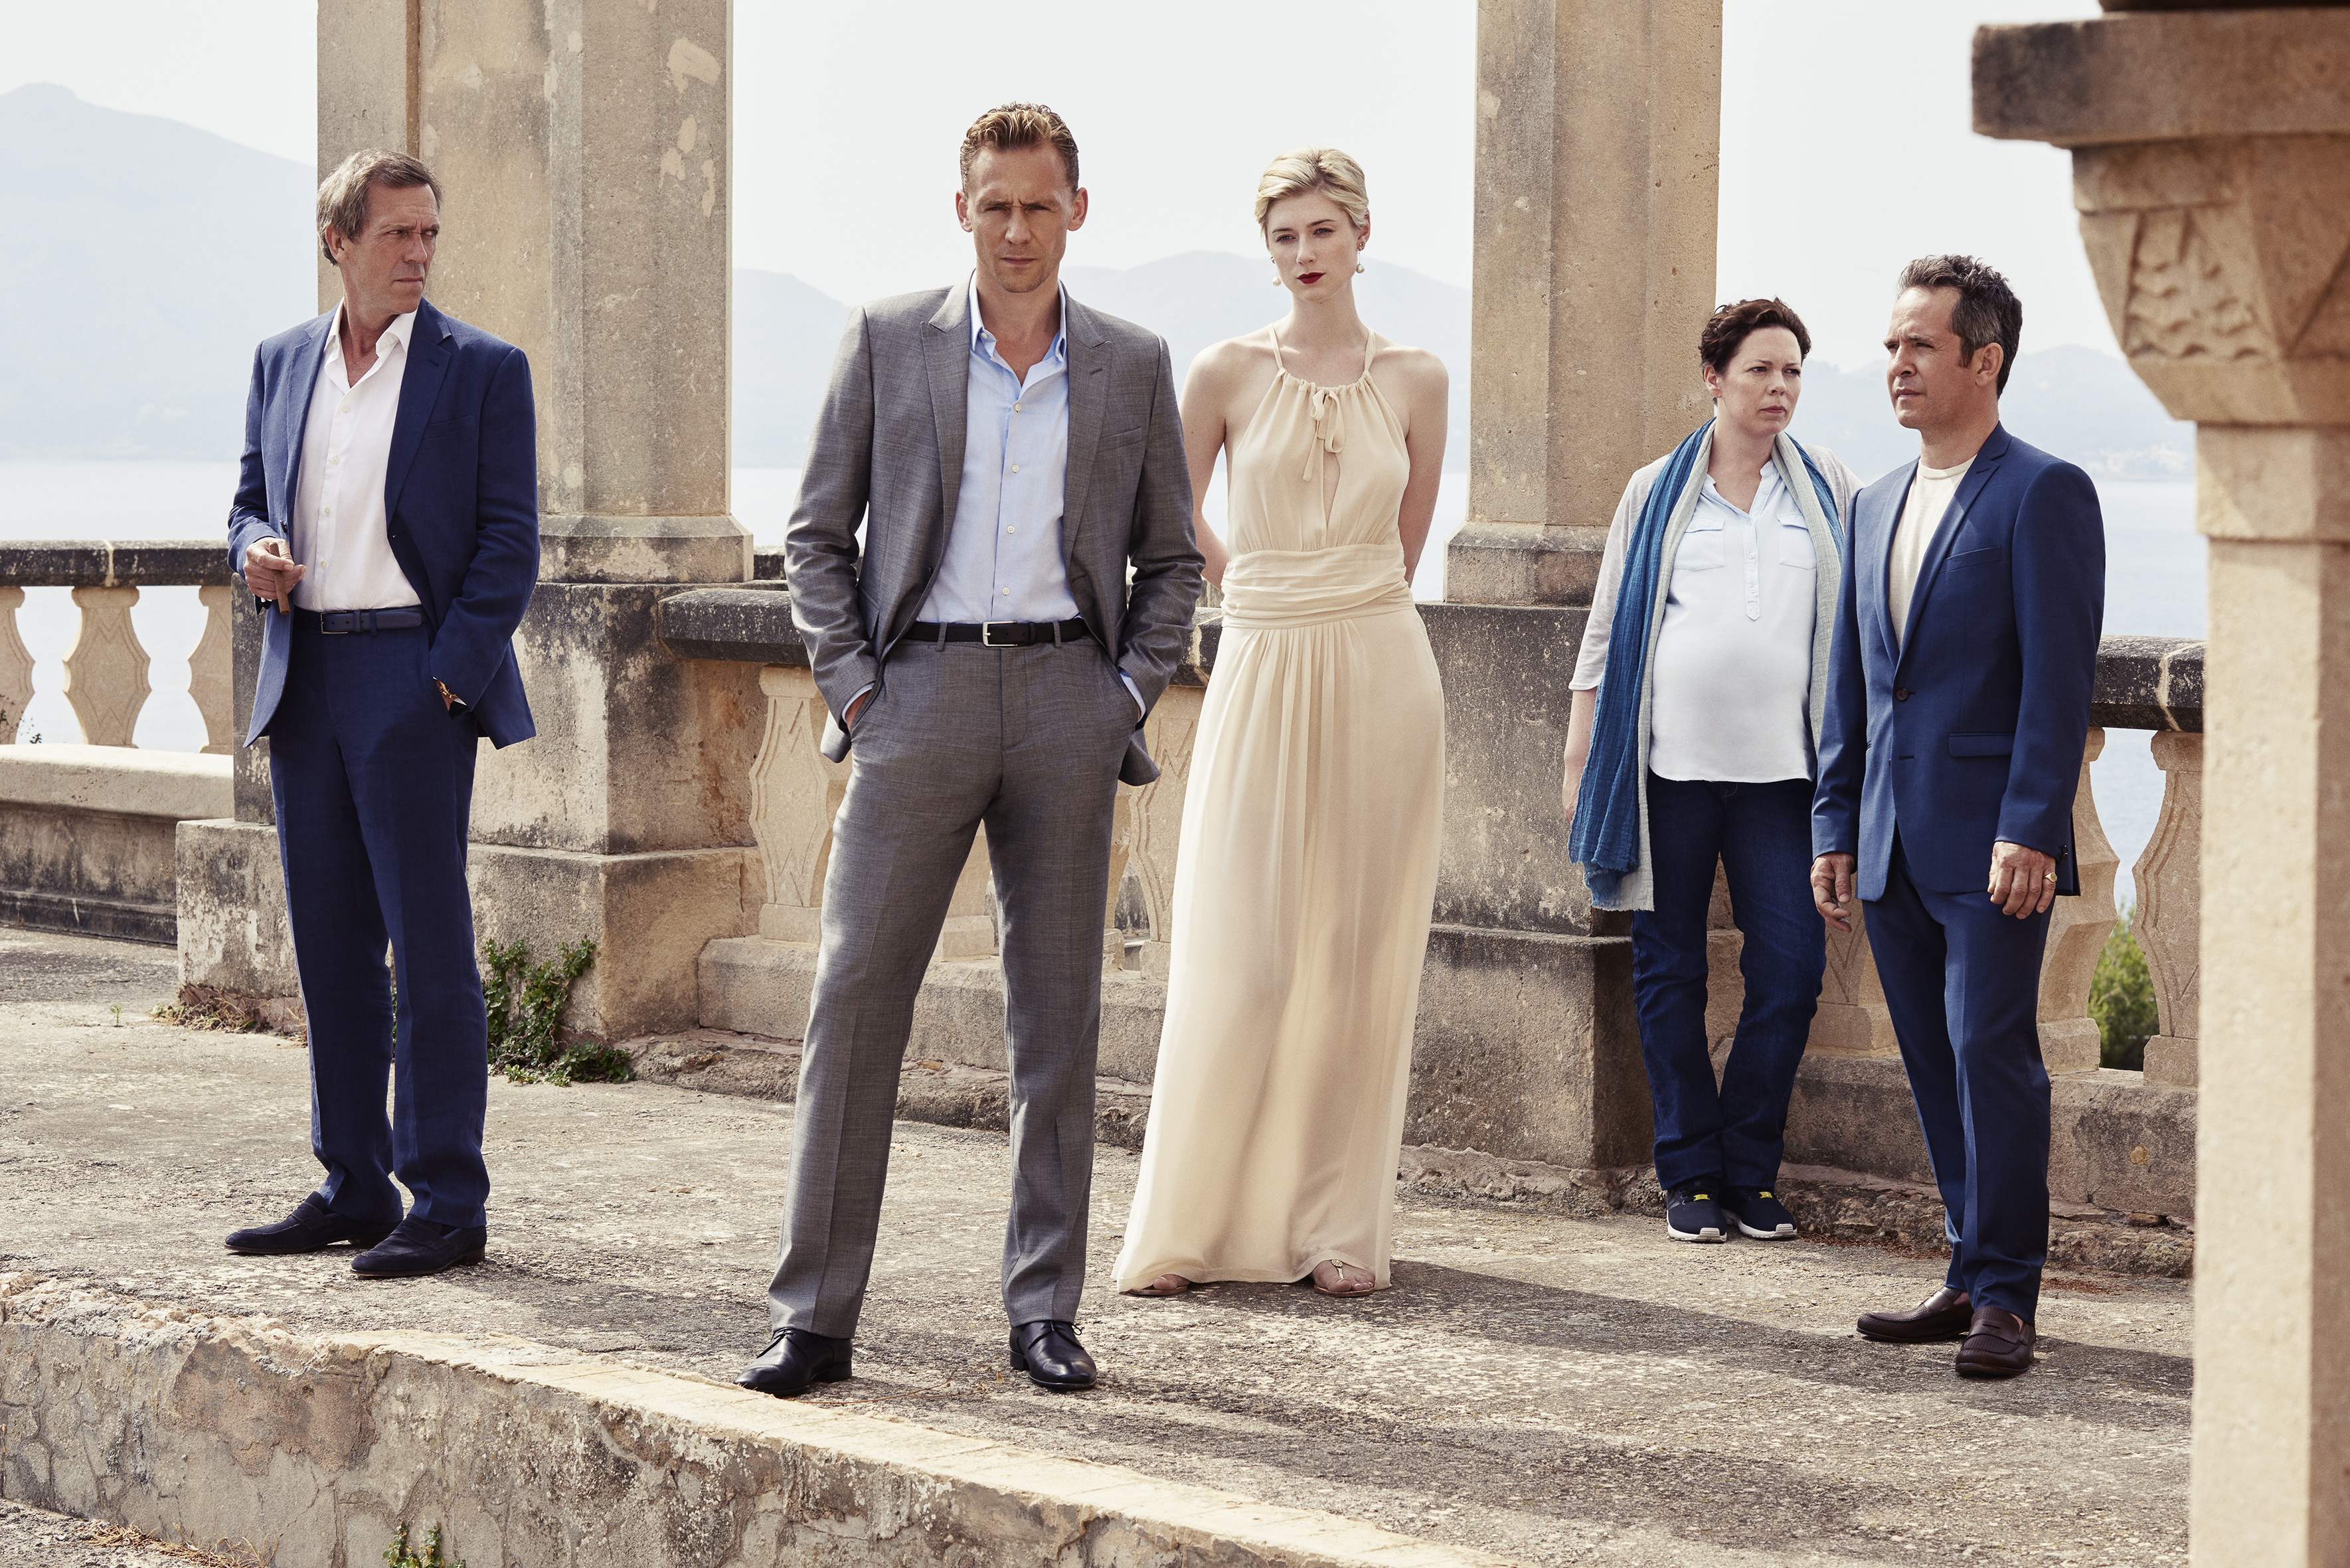 book review the night manager